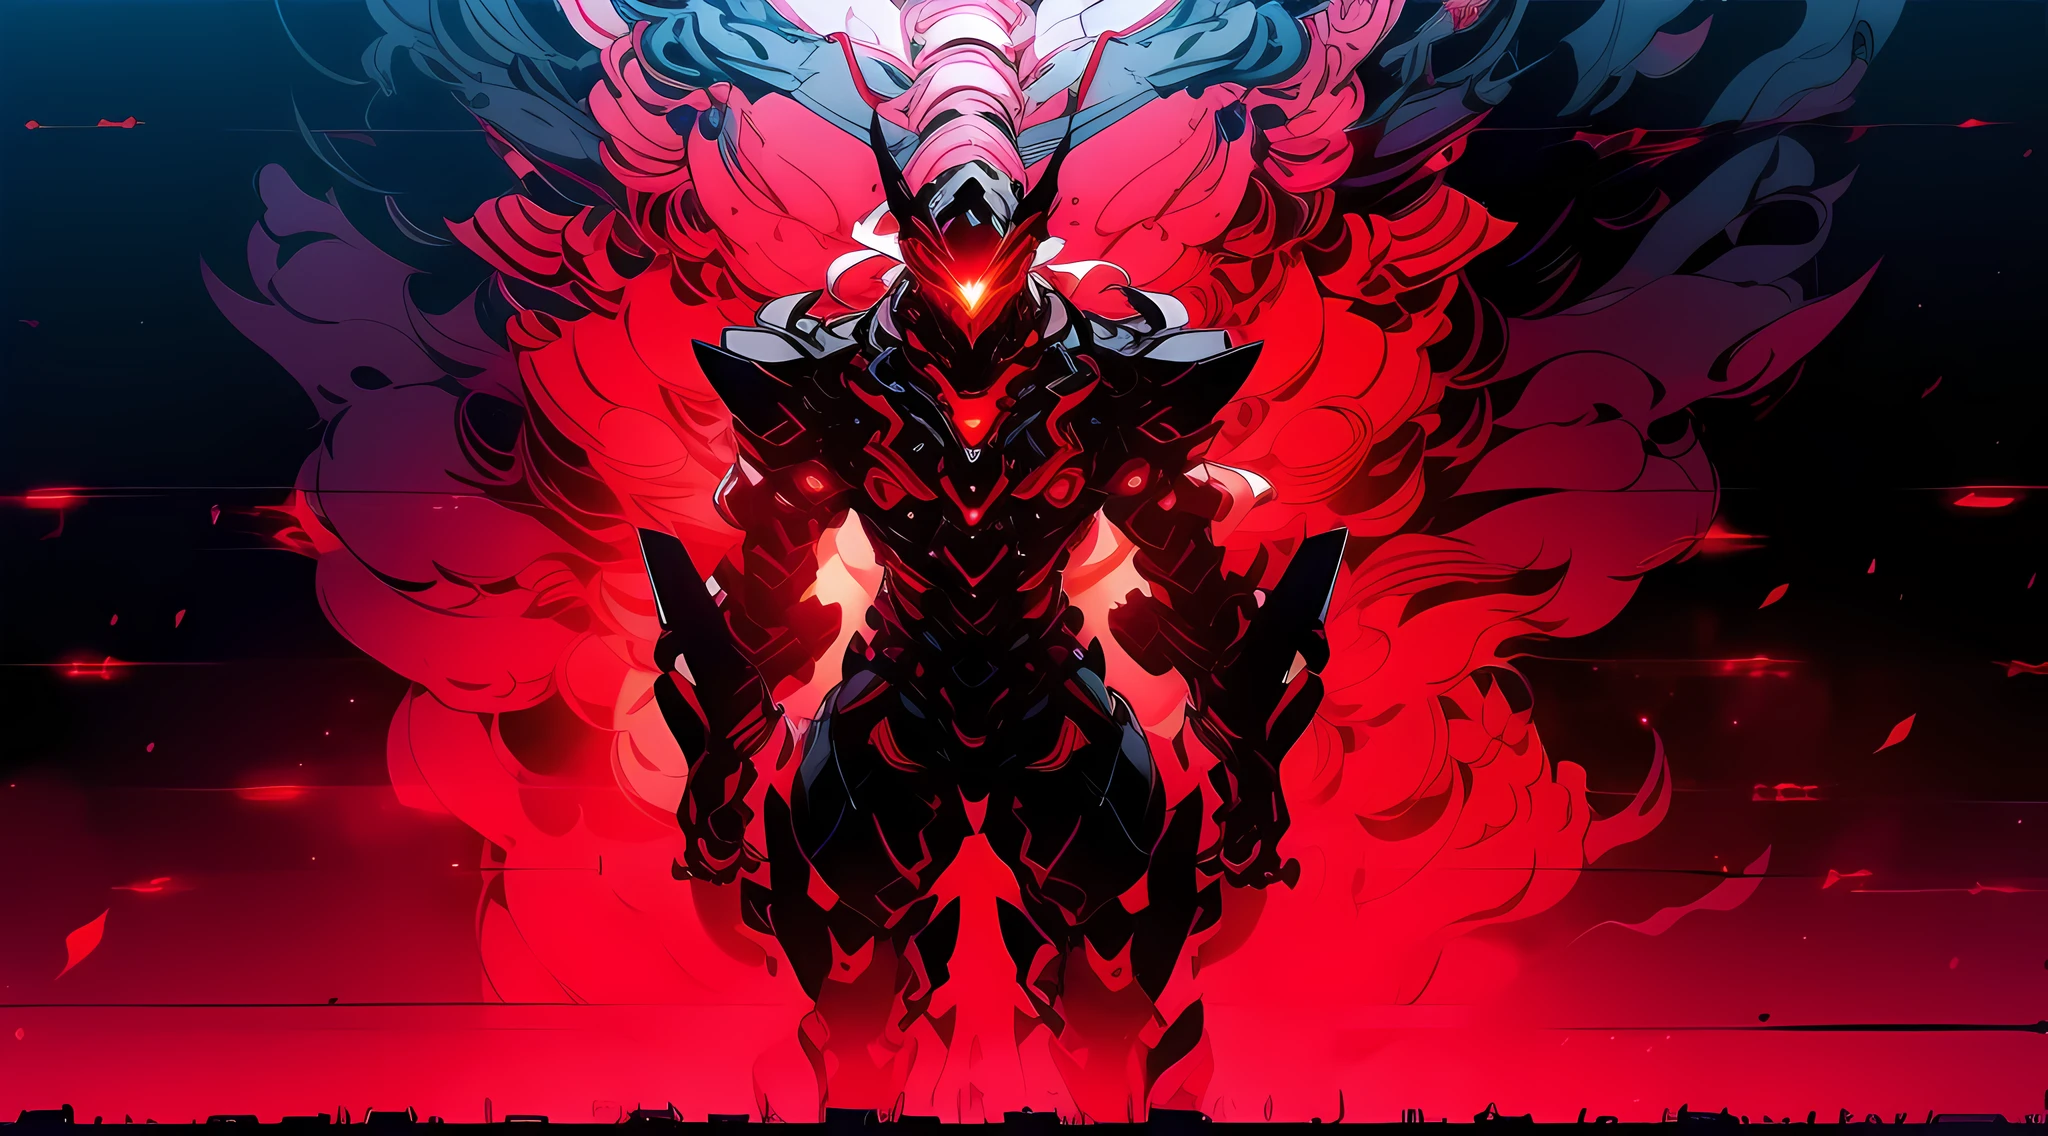 A mech, silver-white long ponytail and waist, V-shaped mechanical helmet, helmet eyes with red light, wearing a black sexy mech suit, white torn cape swaying in the wind, drawing a delicate red glowing sword, standing in the flames, huge roaring mechanical head and robotic arm in the background, lifelike, best image quality, highest definition and clarity, original, surrealism, high detail, futurism, action painting, chiaroscuro, ray tracing, motion blur, cowboy shot, battle pose drawing, Layering, full body display, cyberpunk style, close-up